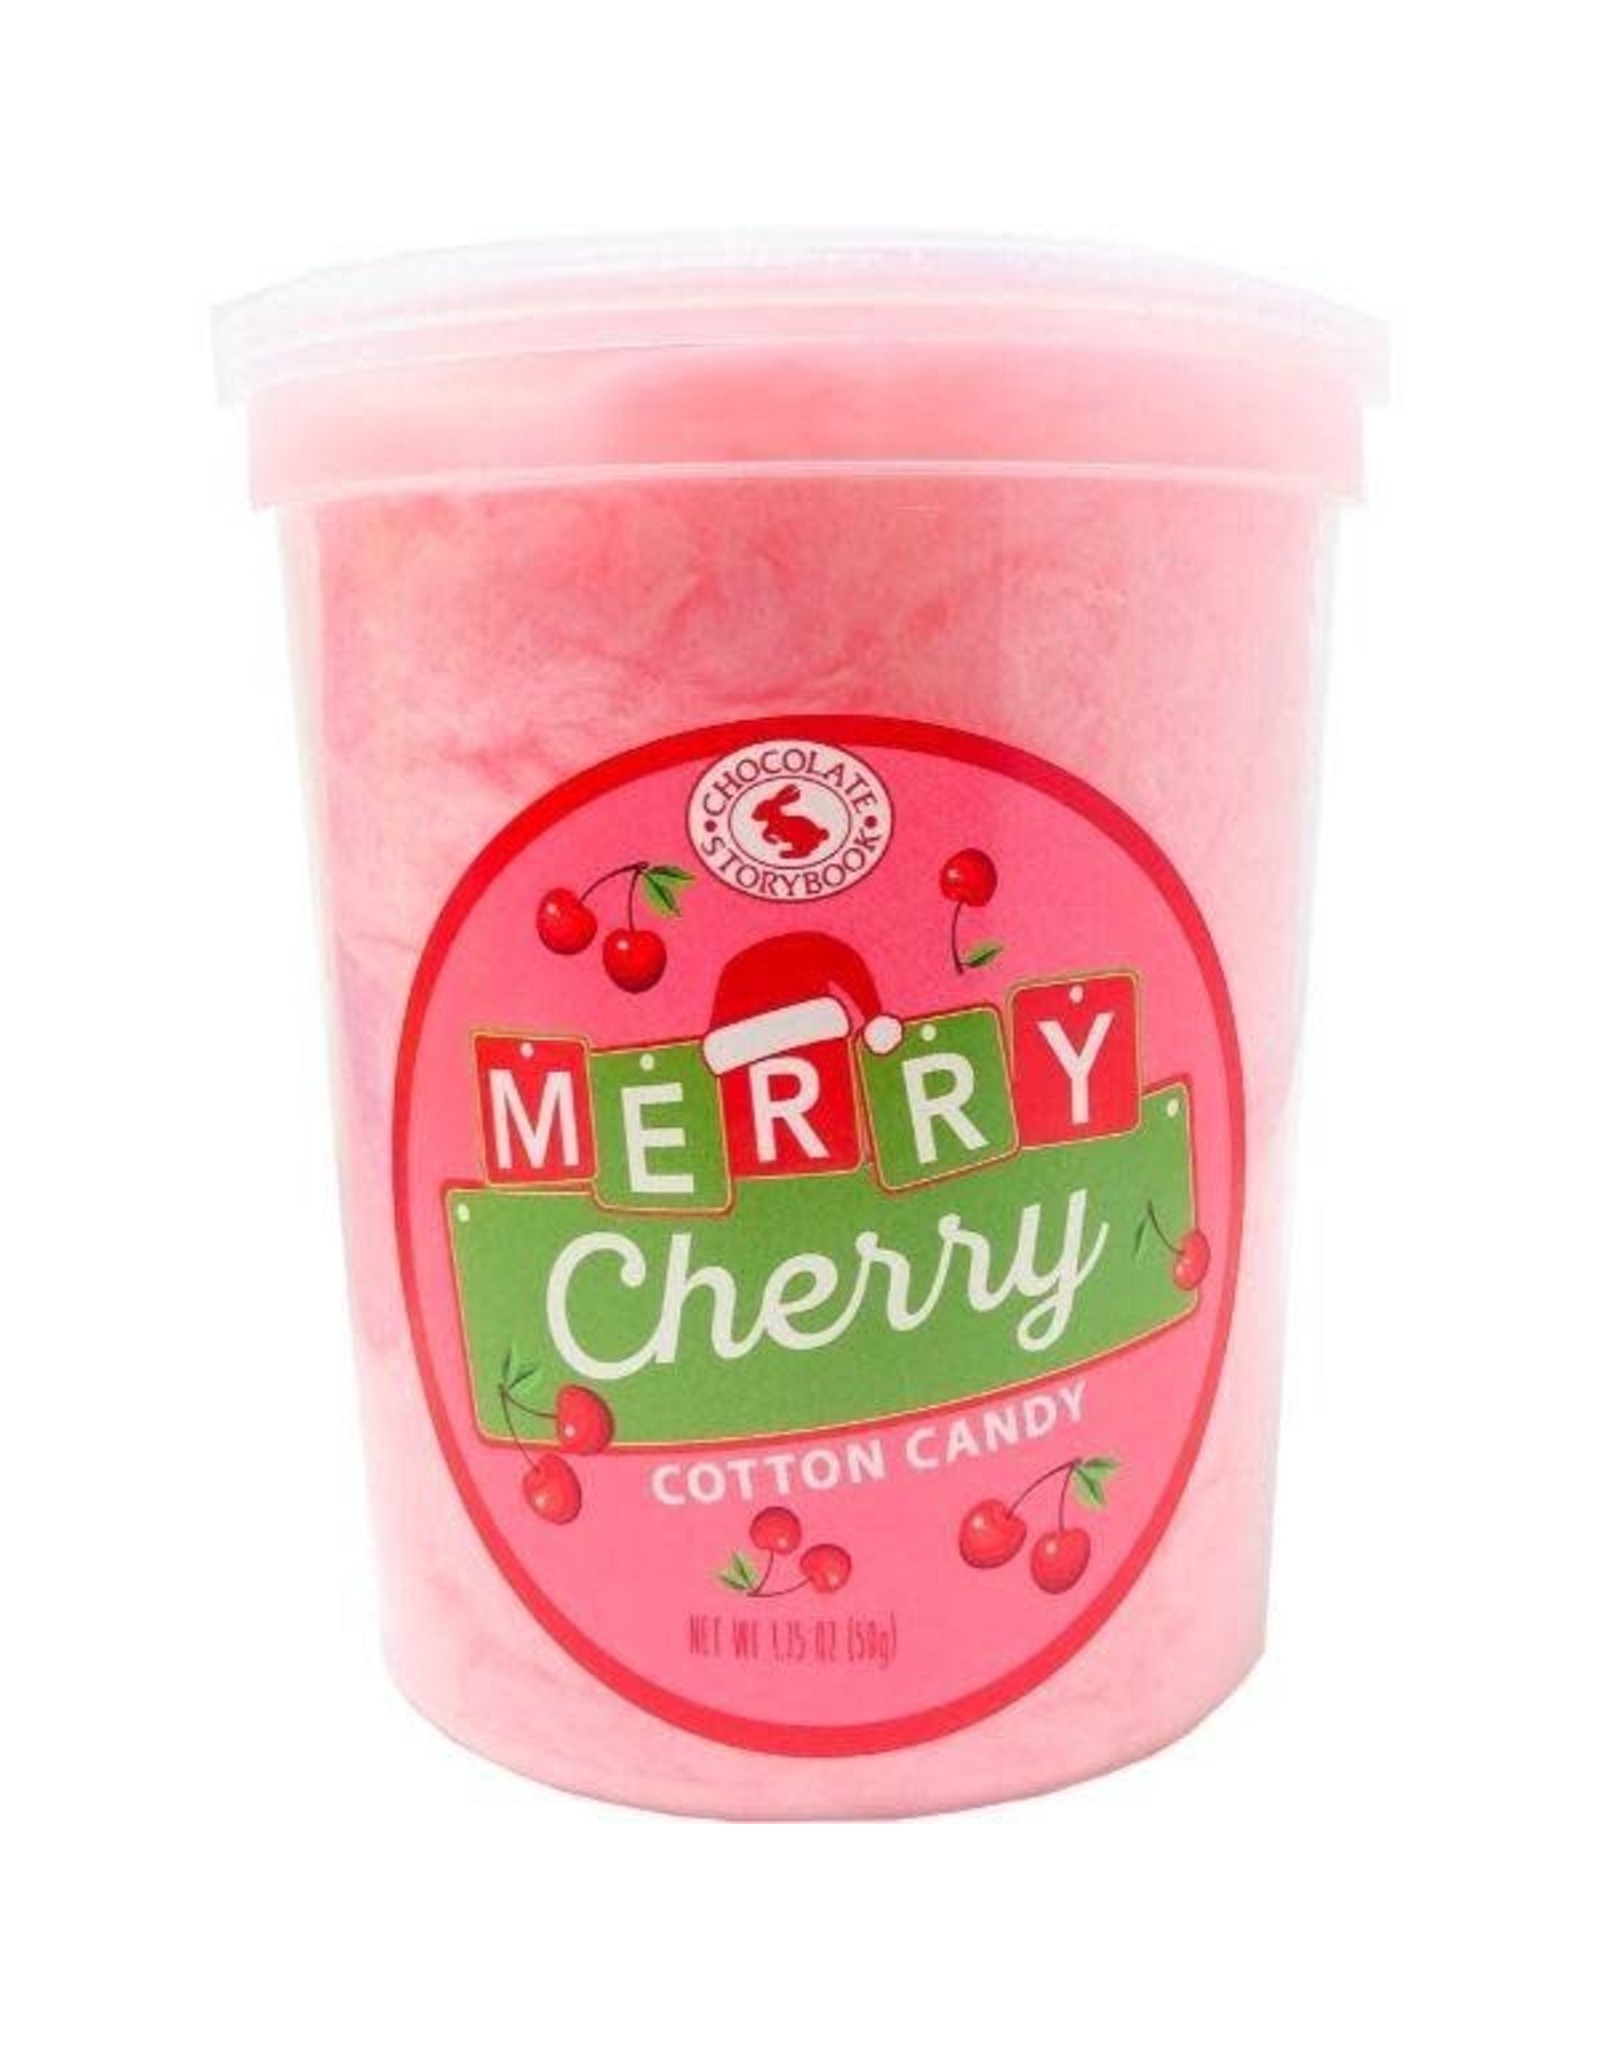 Chocolate Storybook Cotton Candy - Holiday Merry Cherry